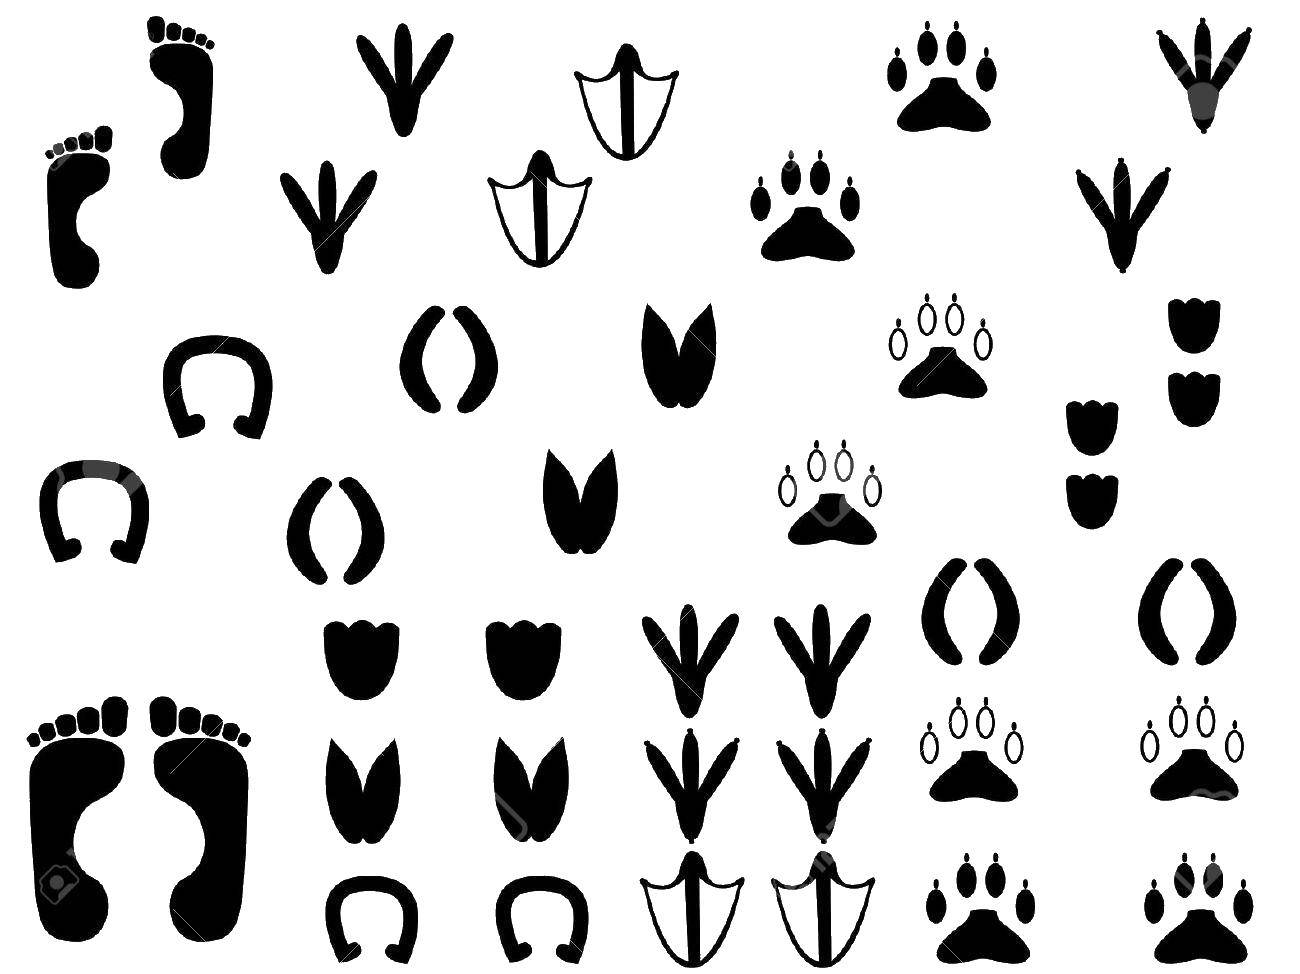 Coloring Footprints of various animals. Category animal tracks. Tags:  Trail.